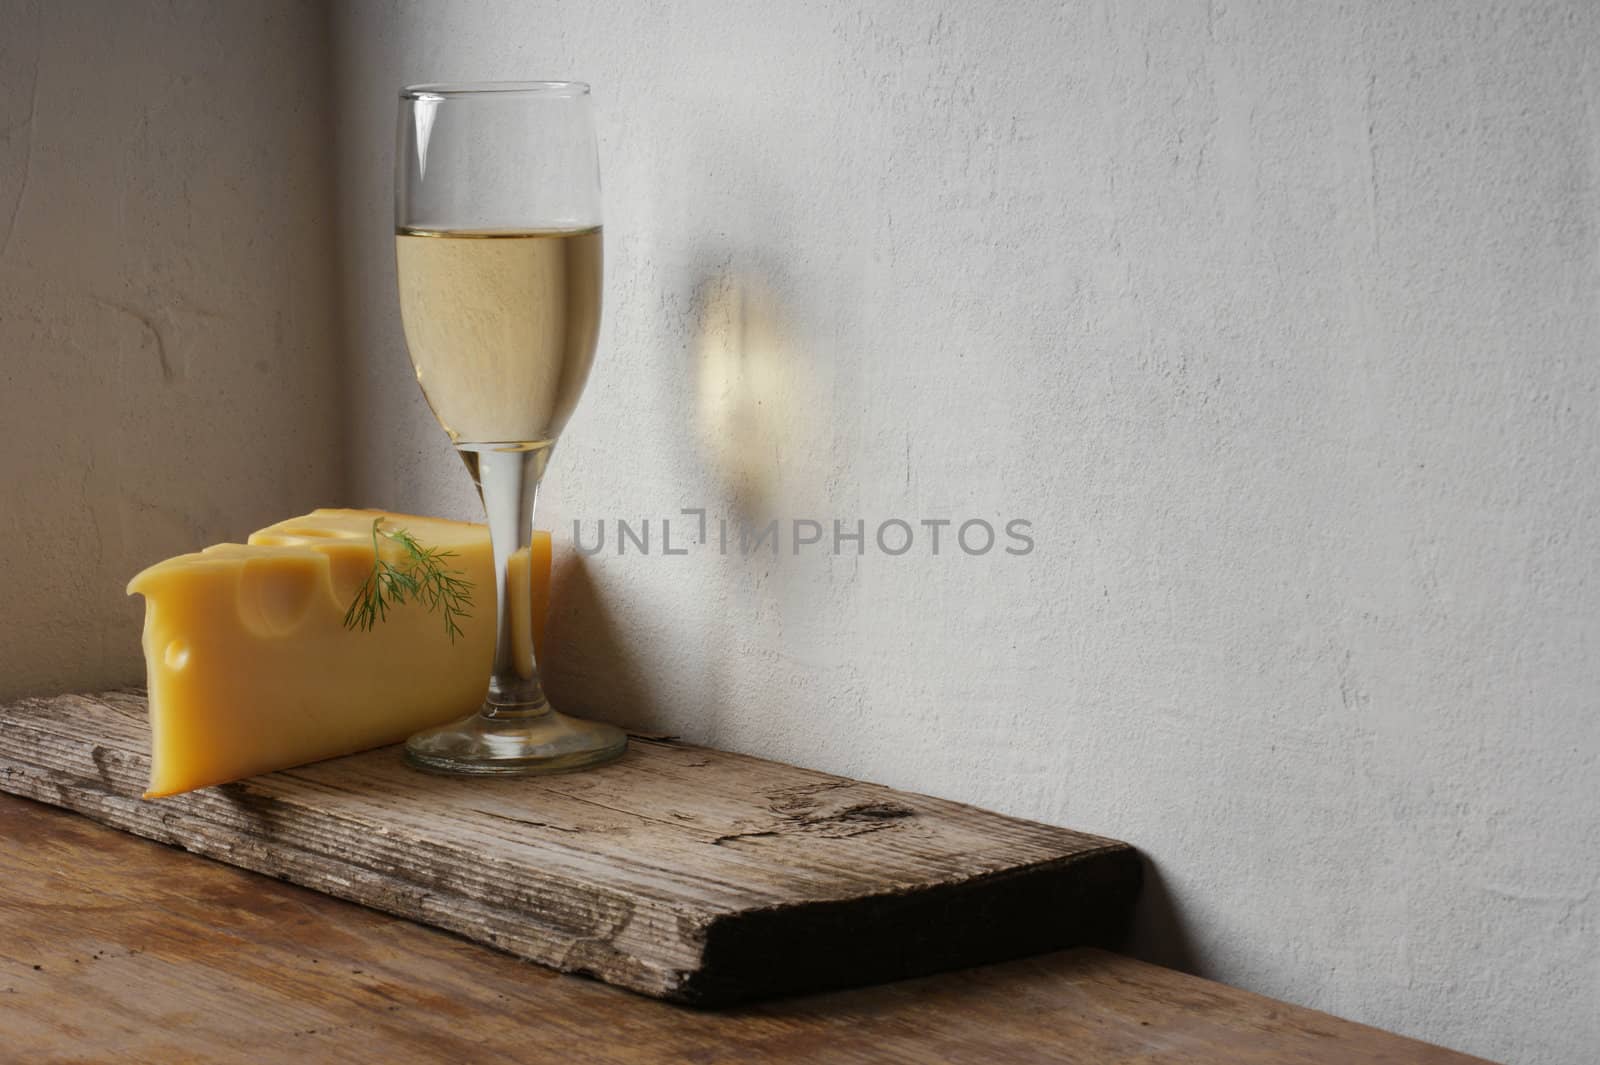 A glass of wine and cheese on the background wall